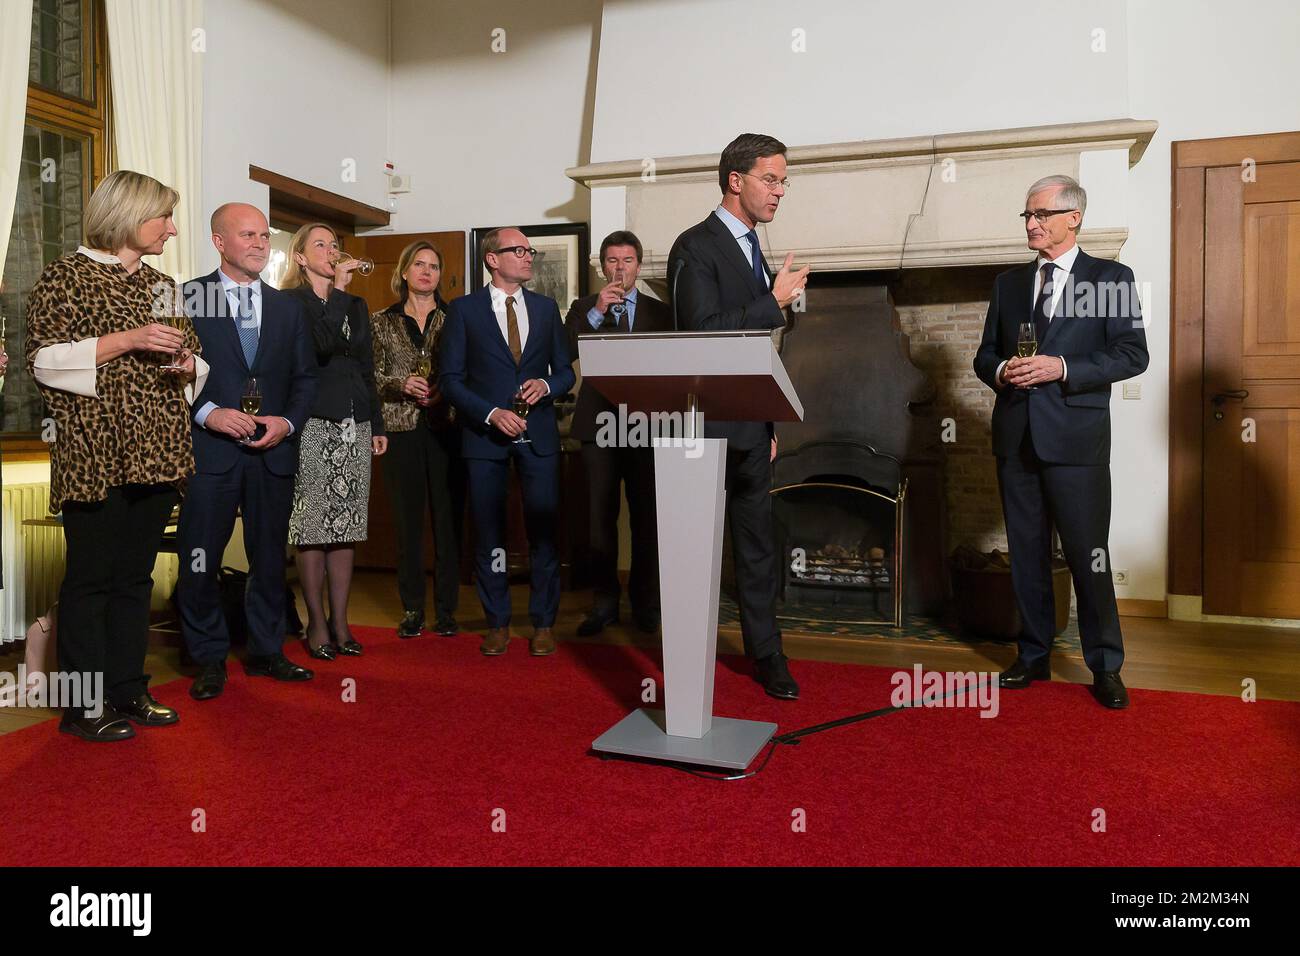 Prime Minister of the Netherlands Mark Rutte and Flemish Minister-President  Geert Bourgeois pictured during a